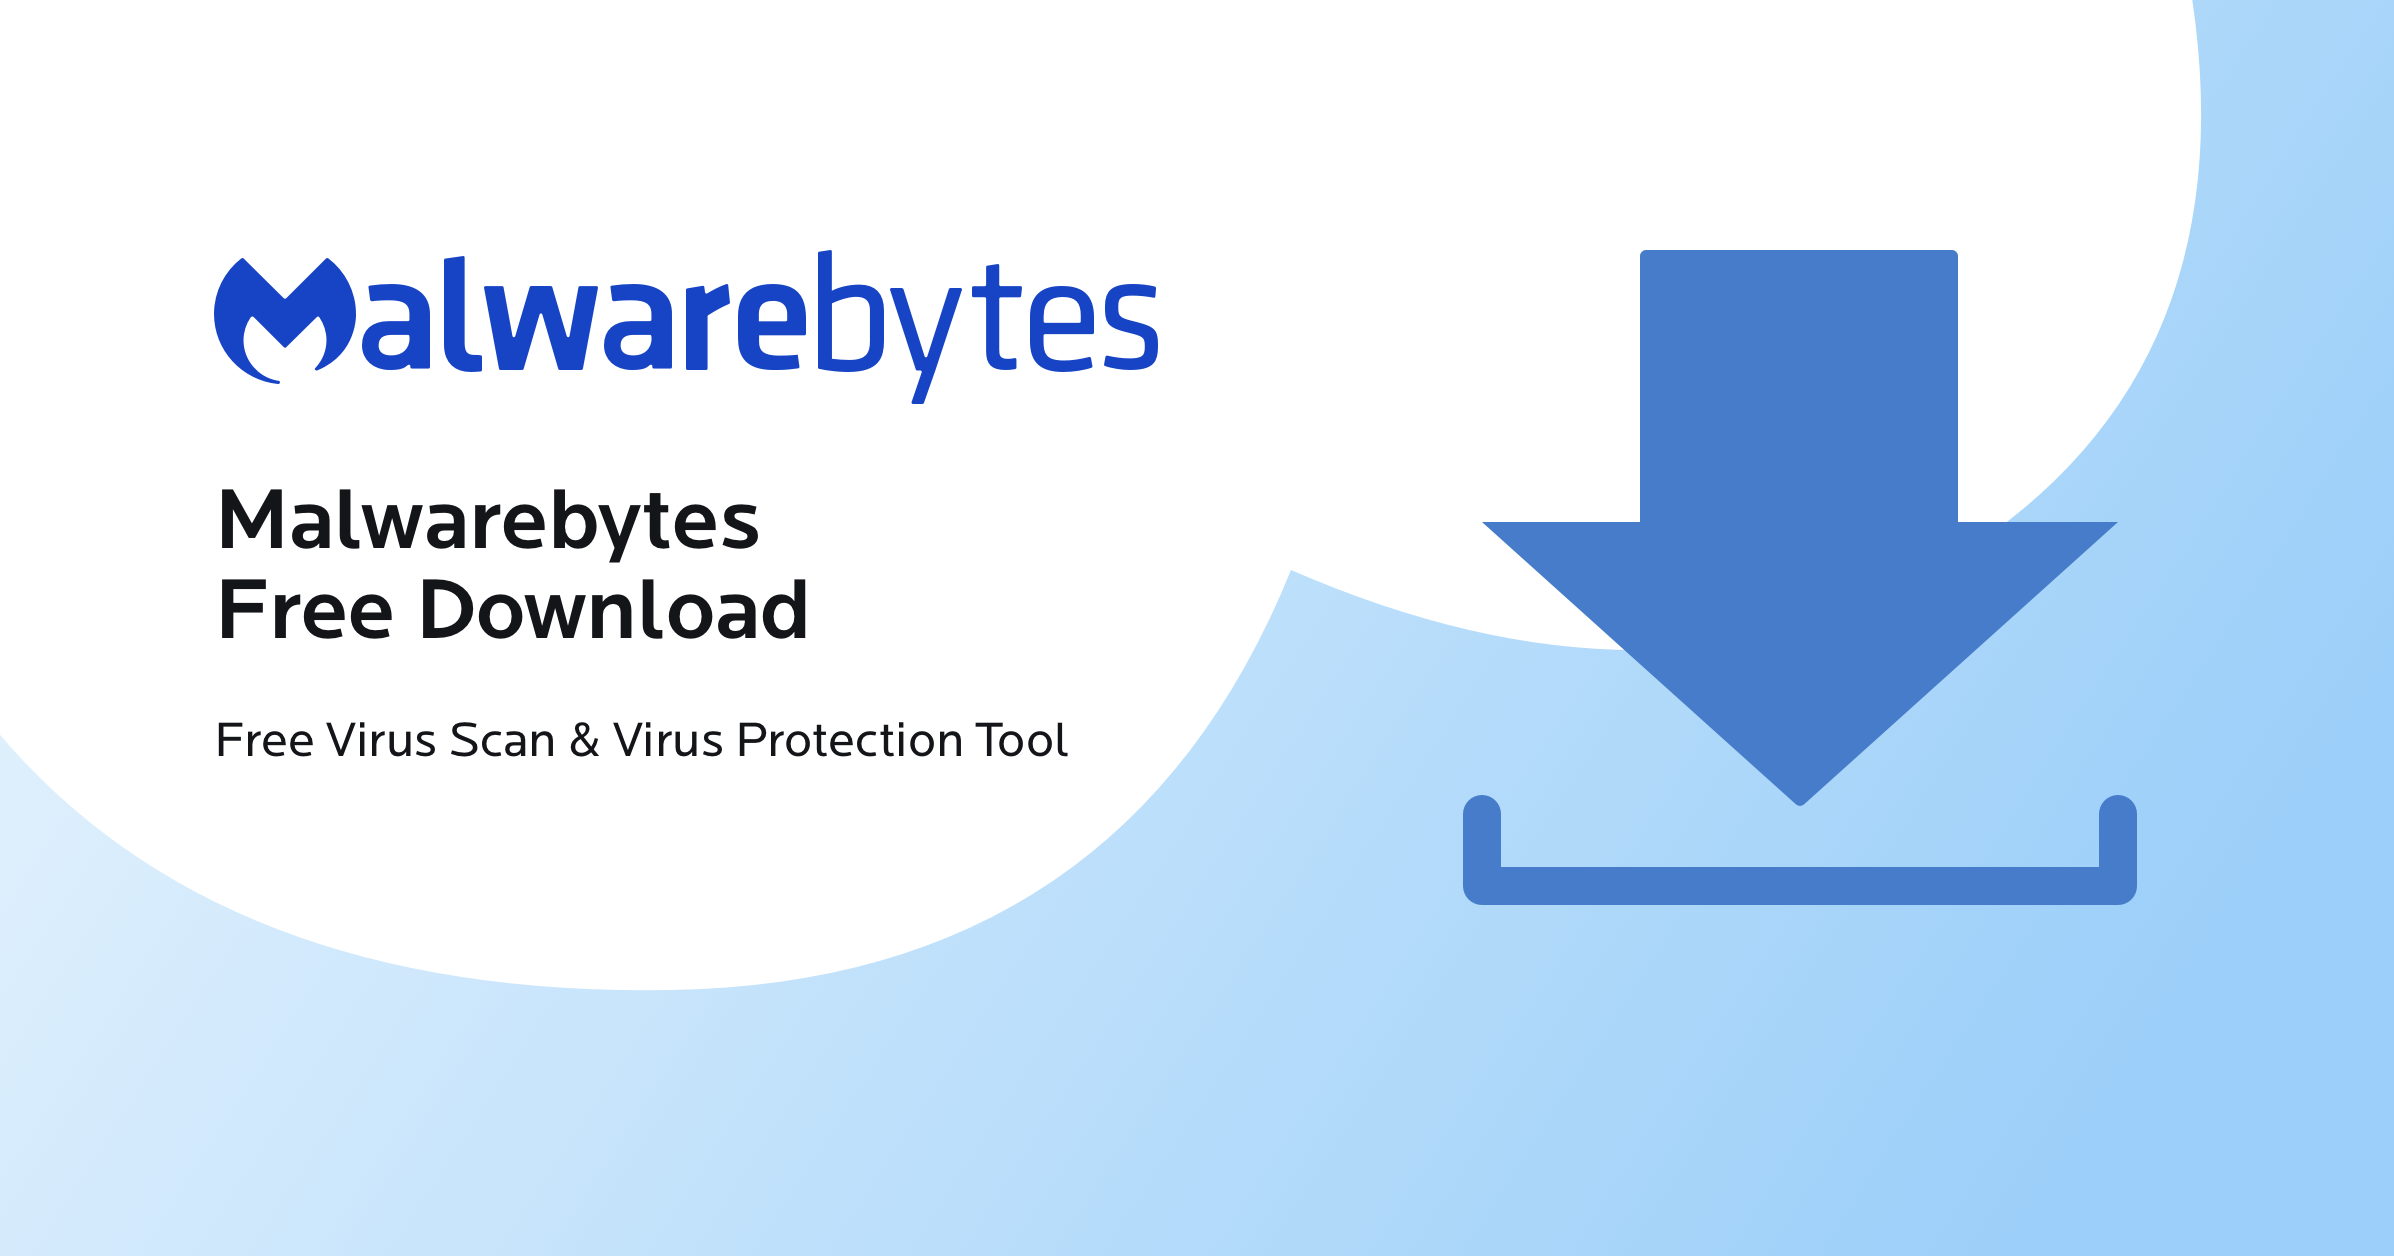 Download and install a reliable anti-malware software.
Run a full system scan to detect and remove any malware present in your system.